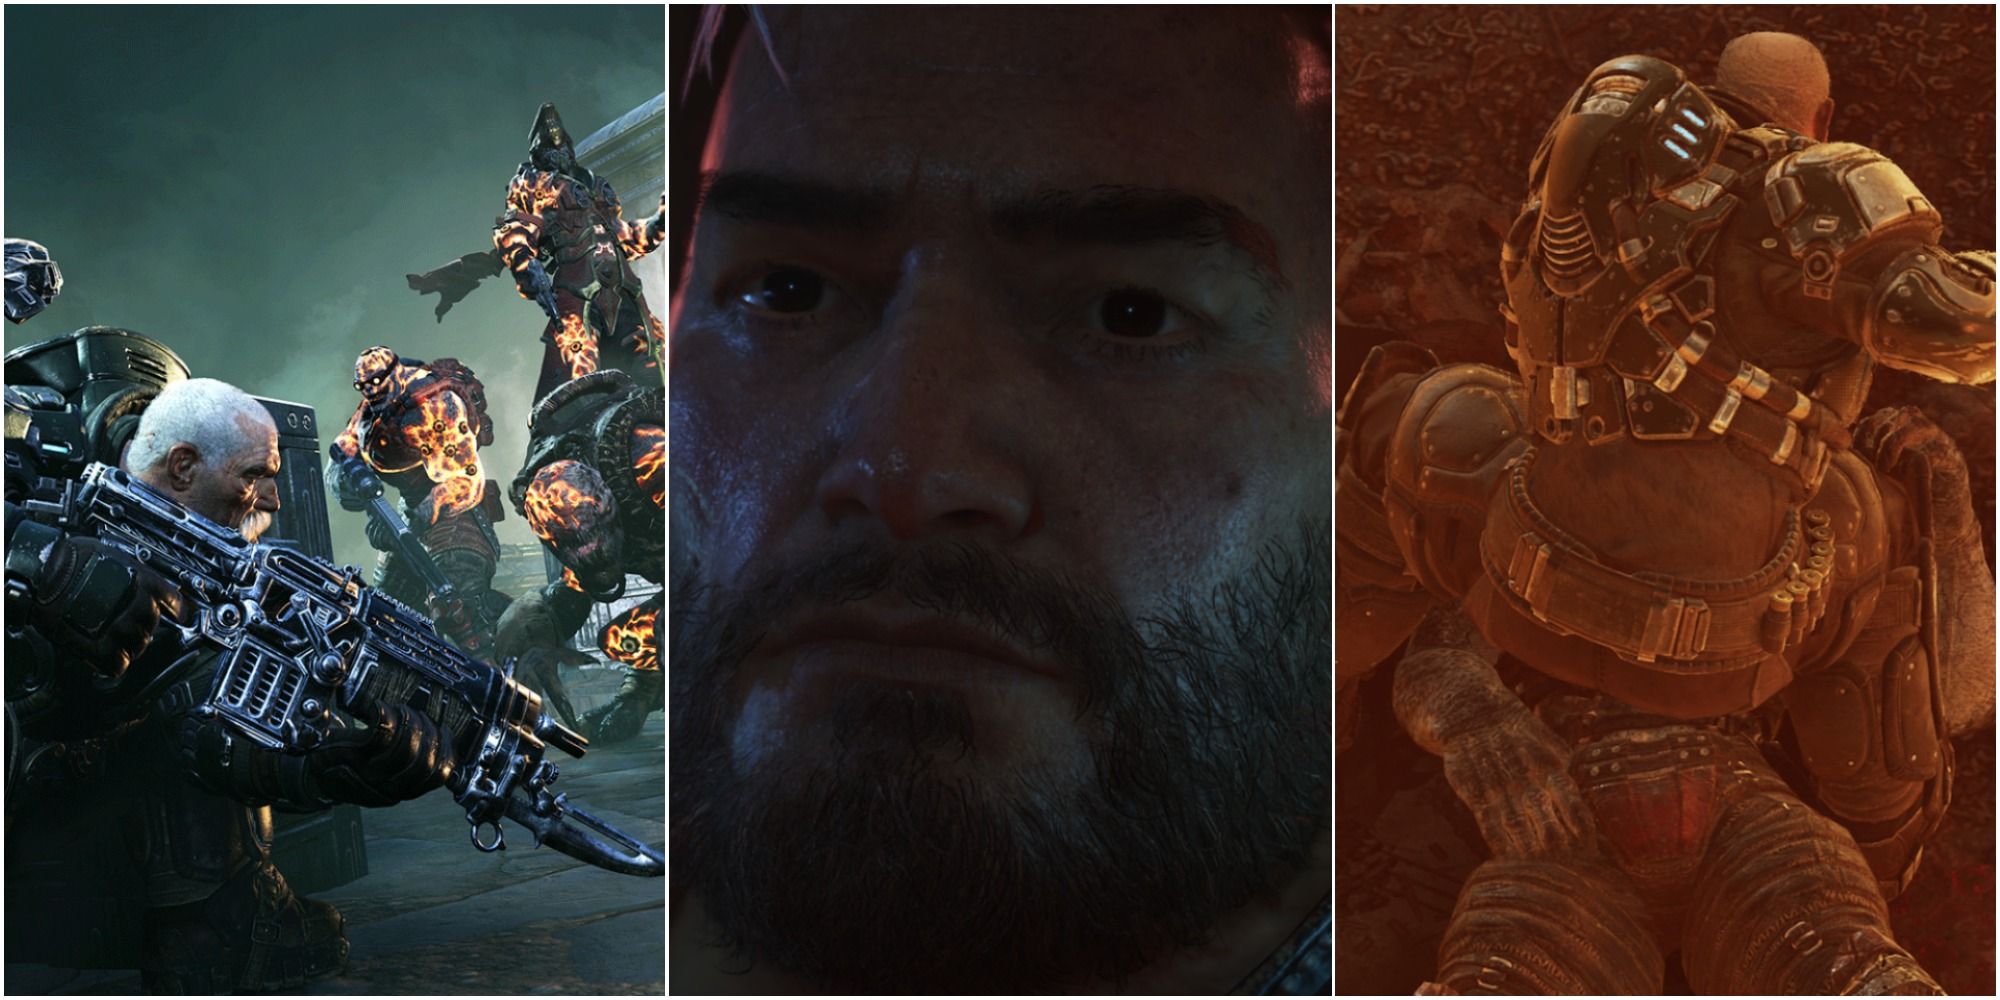 Gears Tactics on the left is Sid hiding behind covering looking at Locust, in the middle is an extremely close up of Gabriel Diaz and on the right is Sid beating up a dead Locust